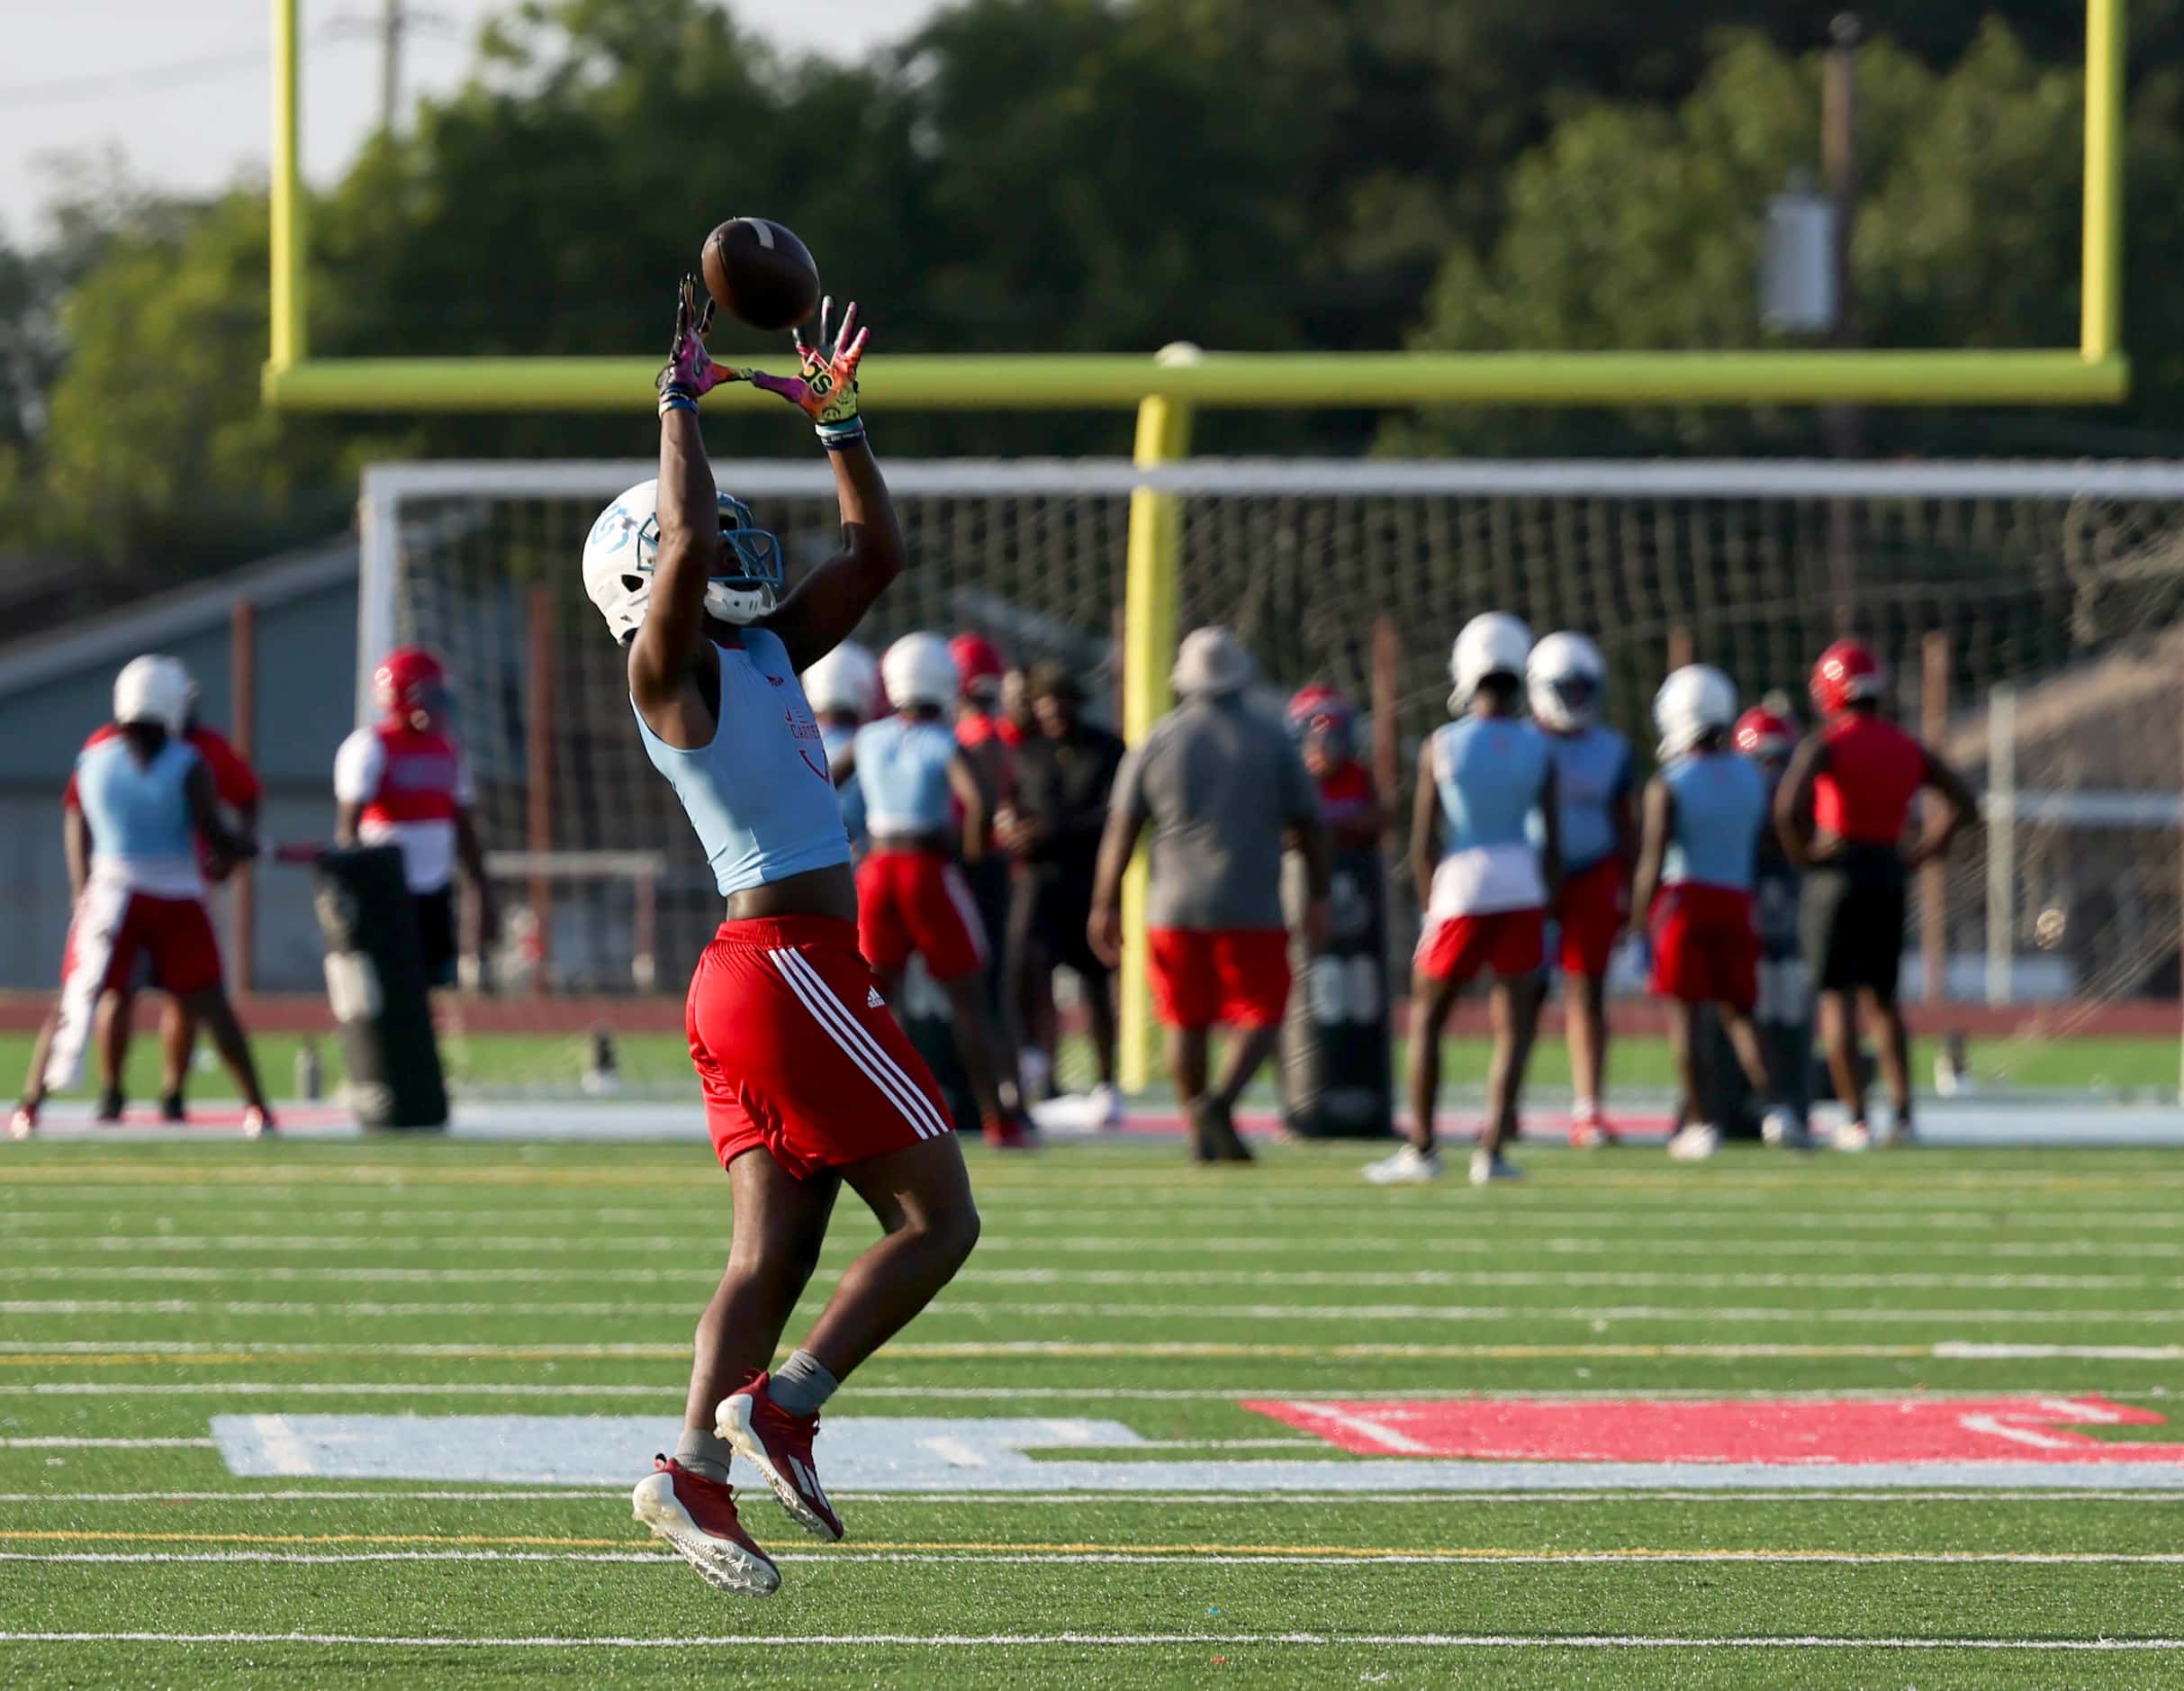 Camden Patterson jumps to catch a pass during the first football practice of the season at...